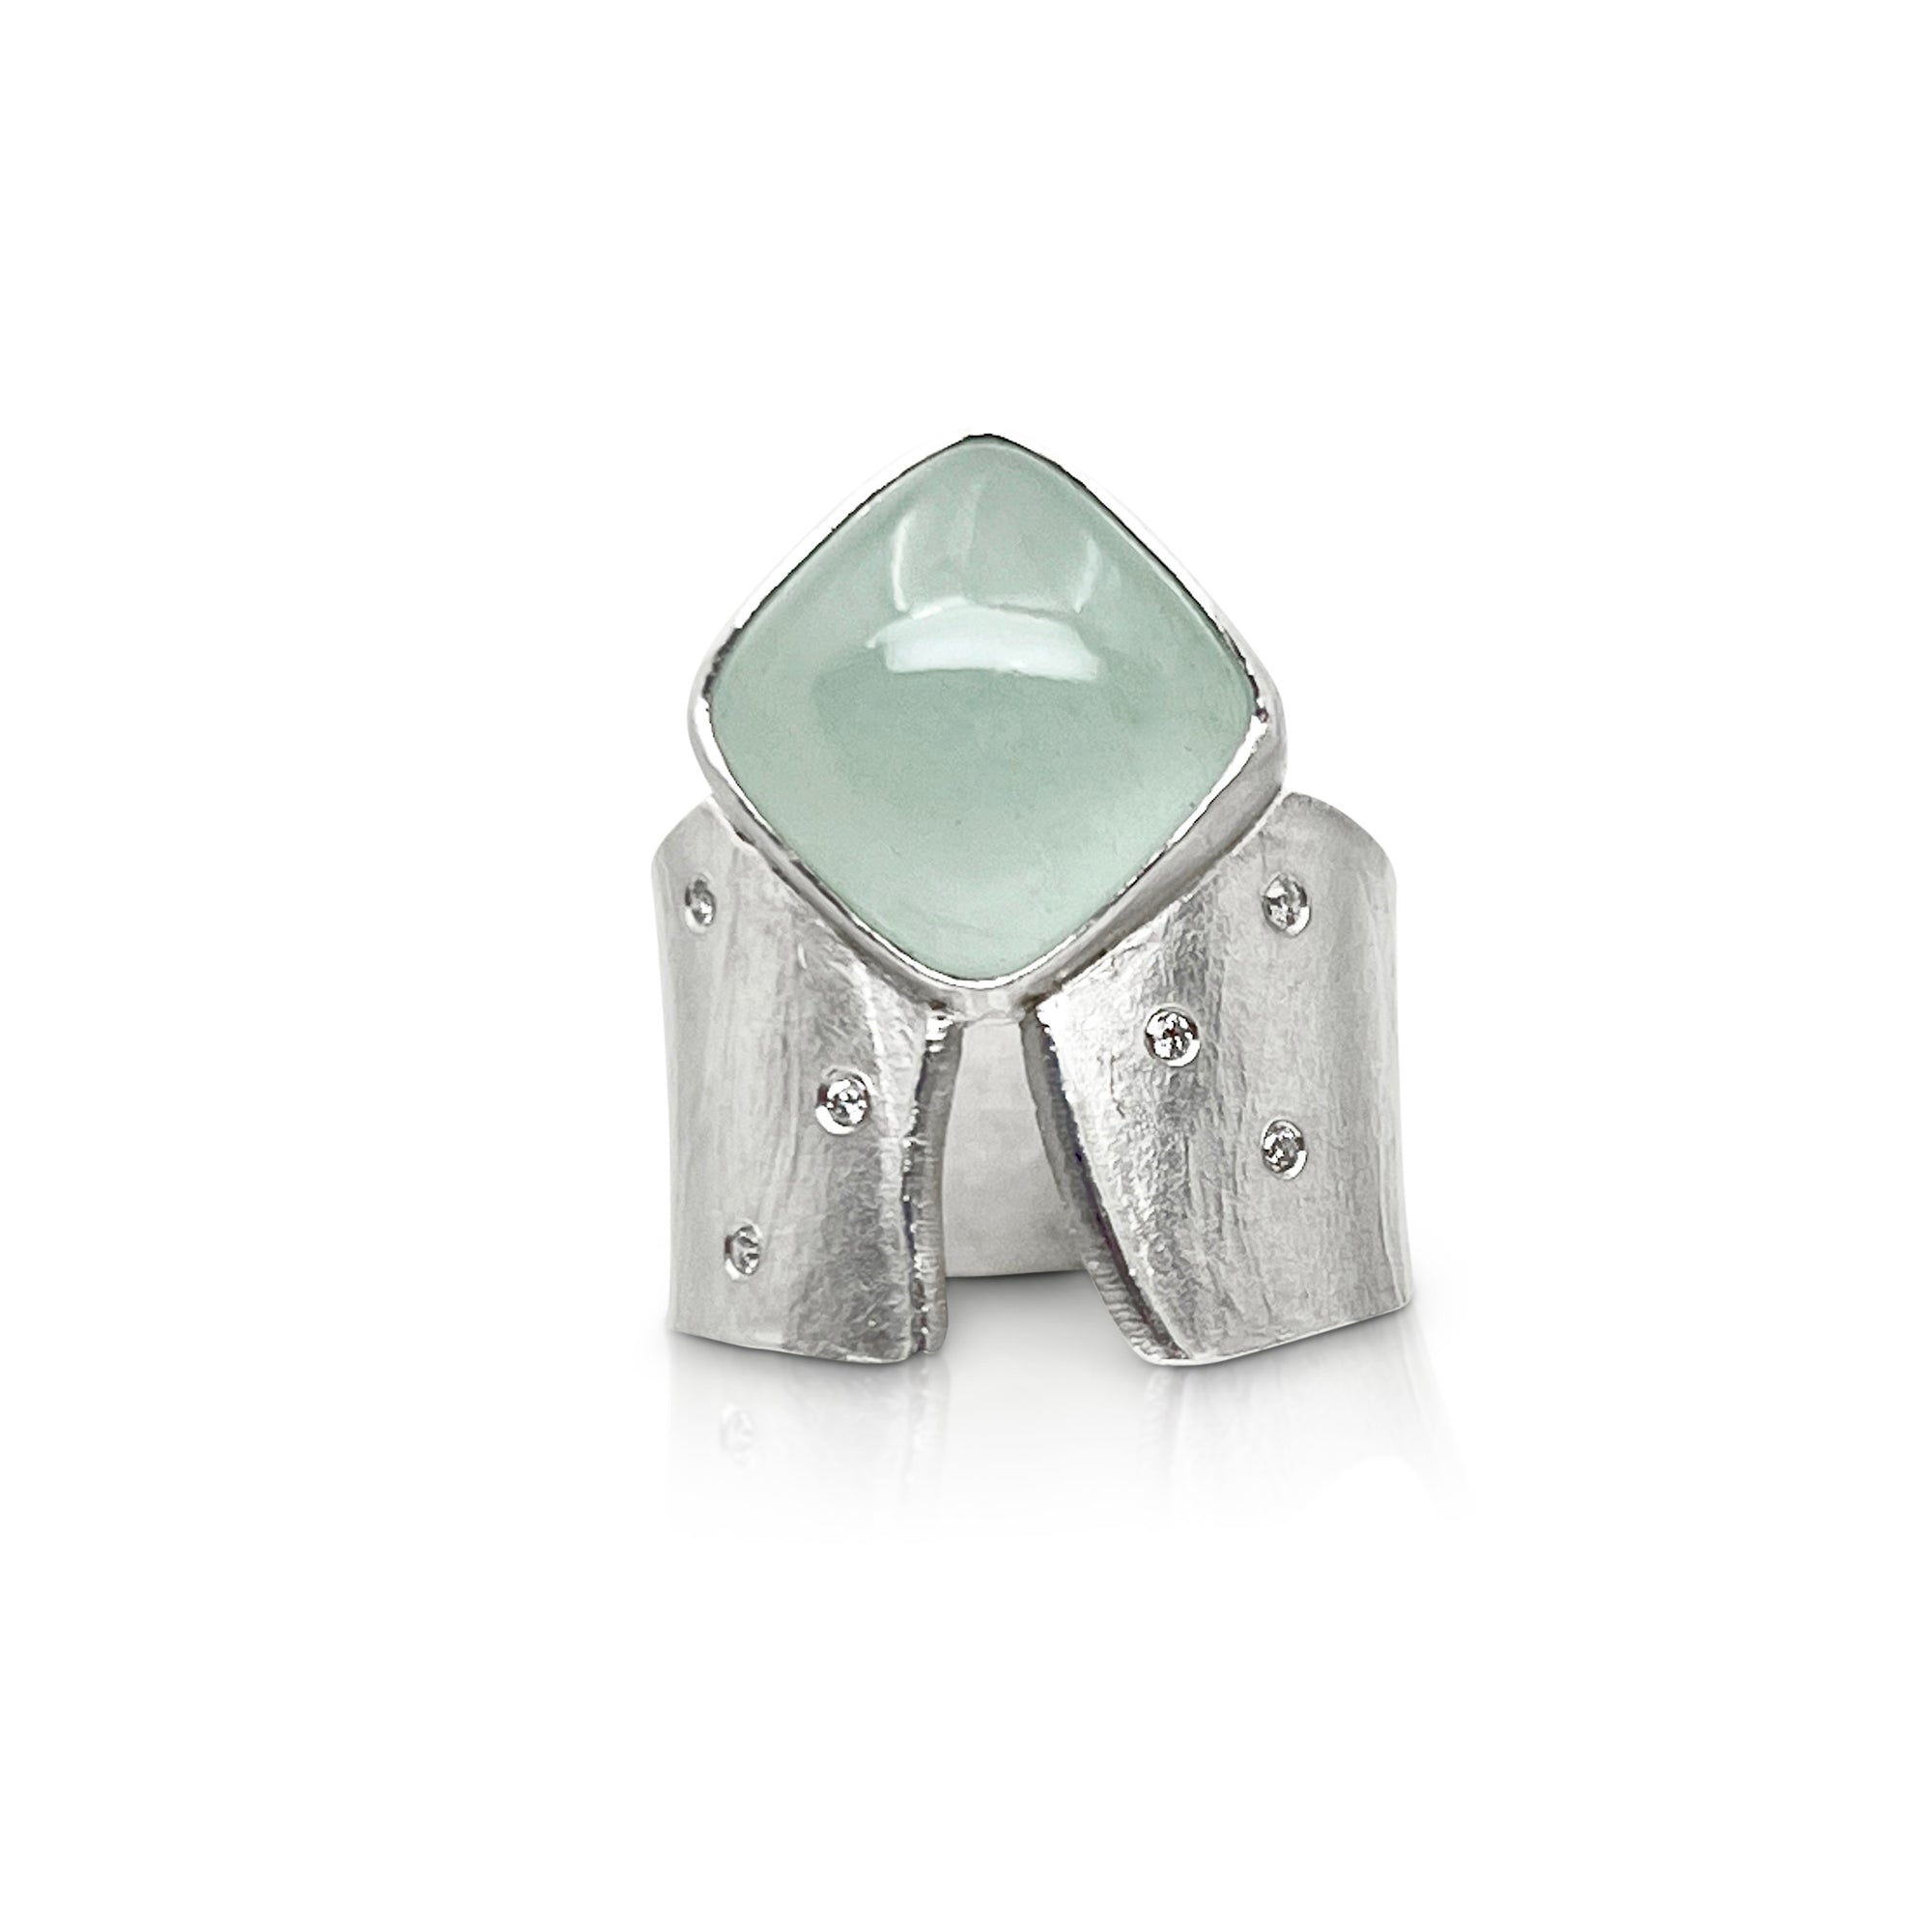 Wafer ring in sterling silver with square cabochon Aquamarine and diamonds